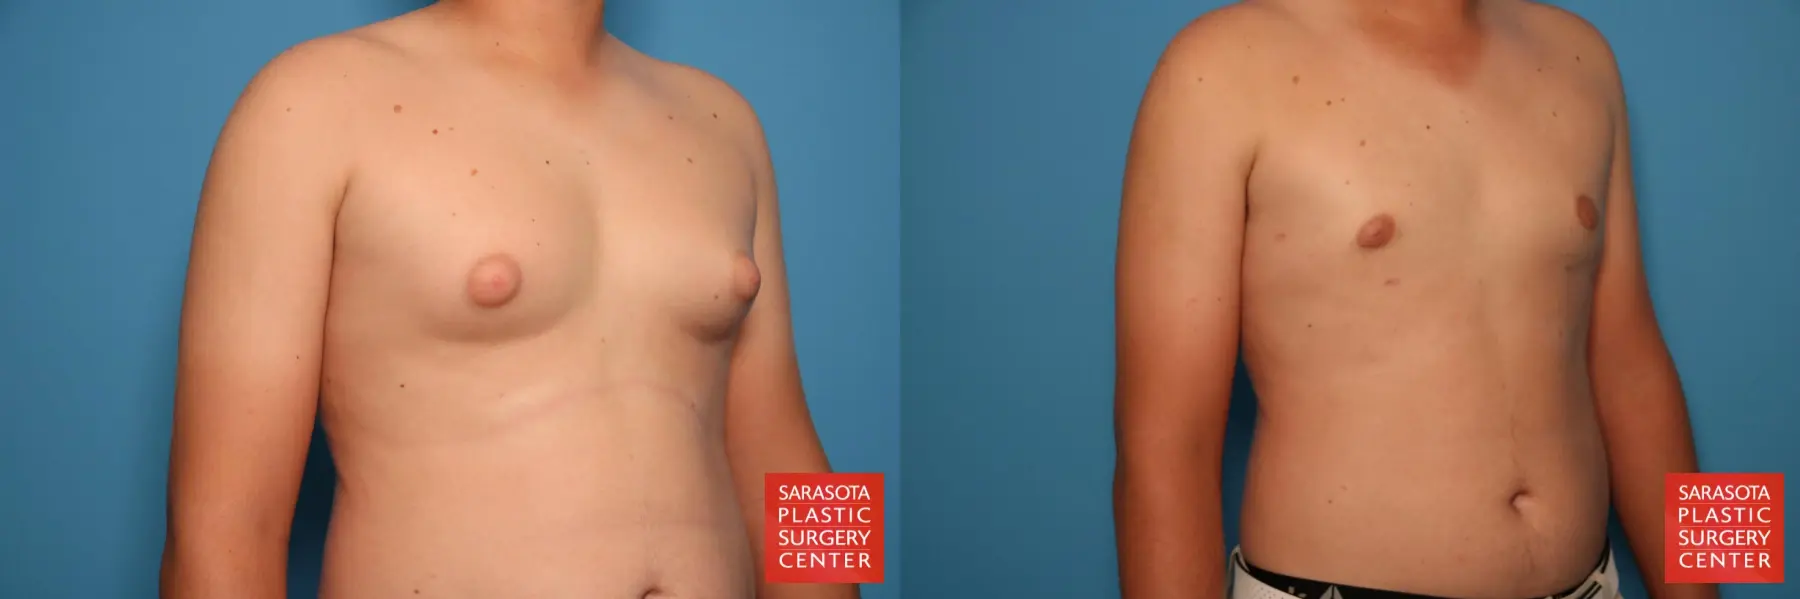 Gynecomastia: Patient 8 - Before and After 3